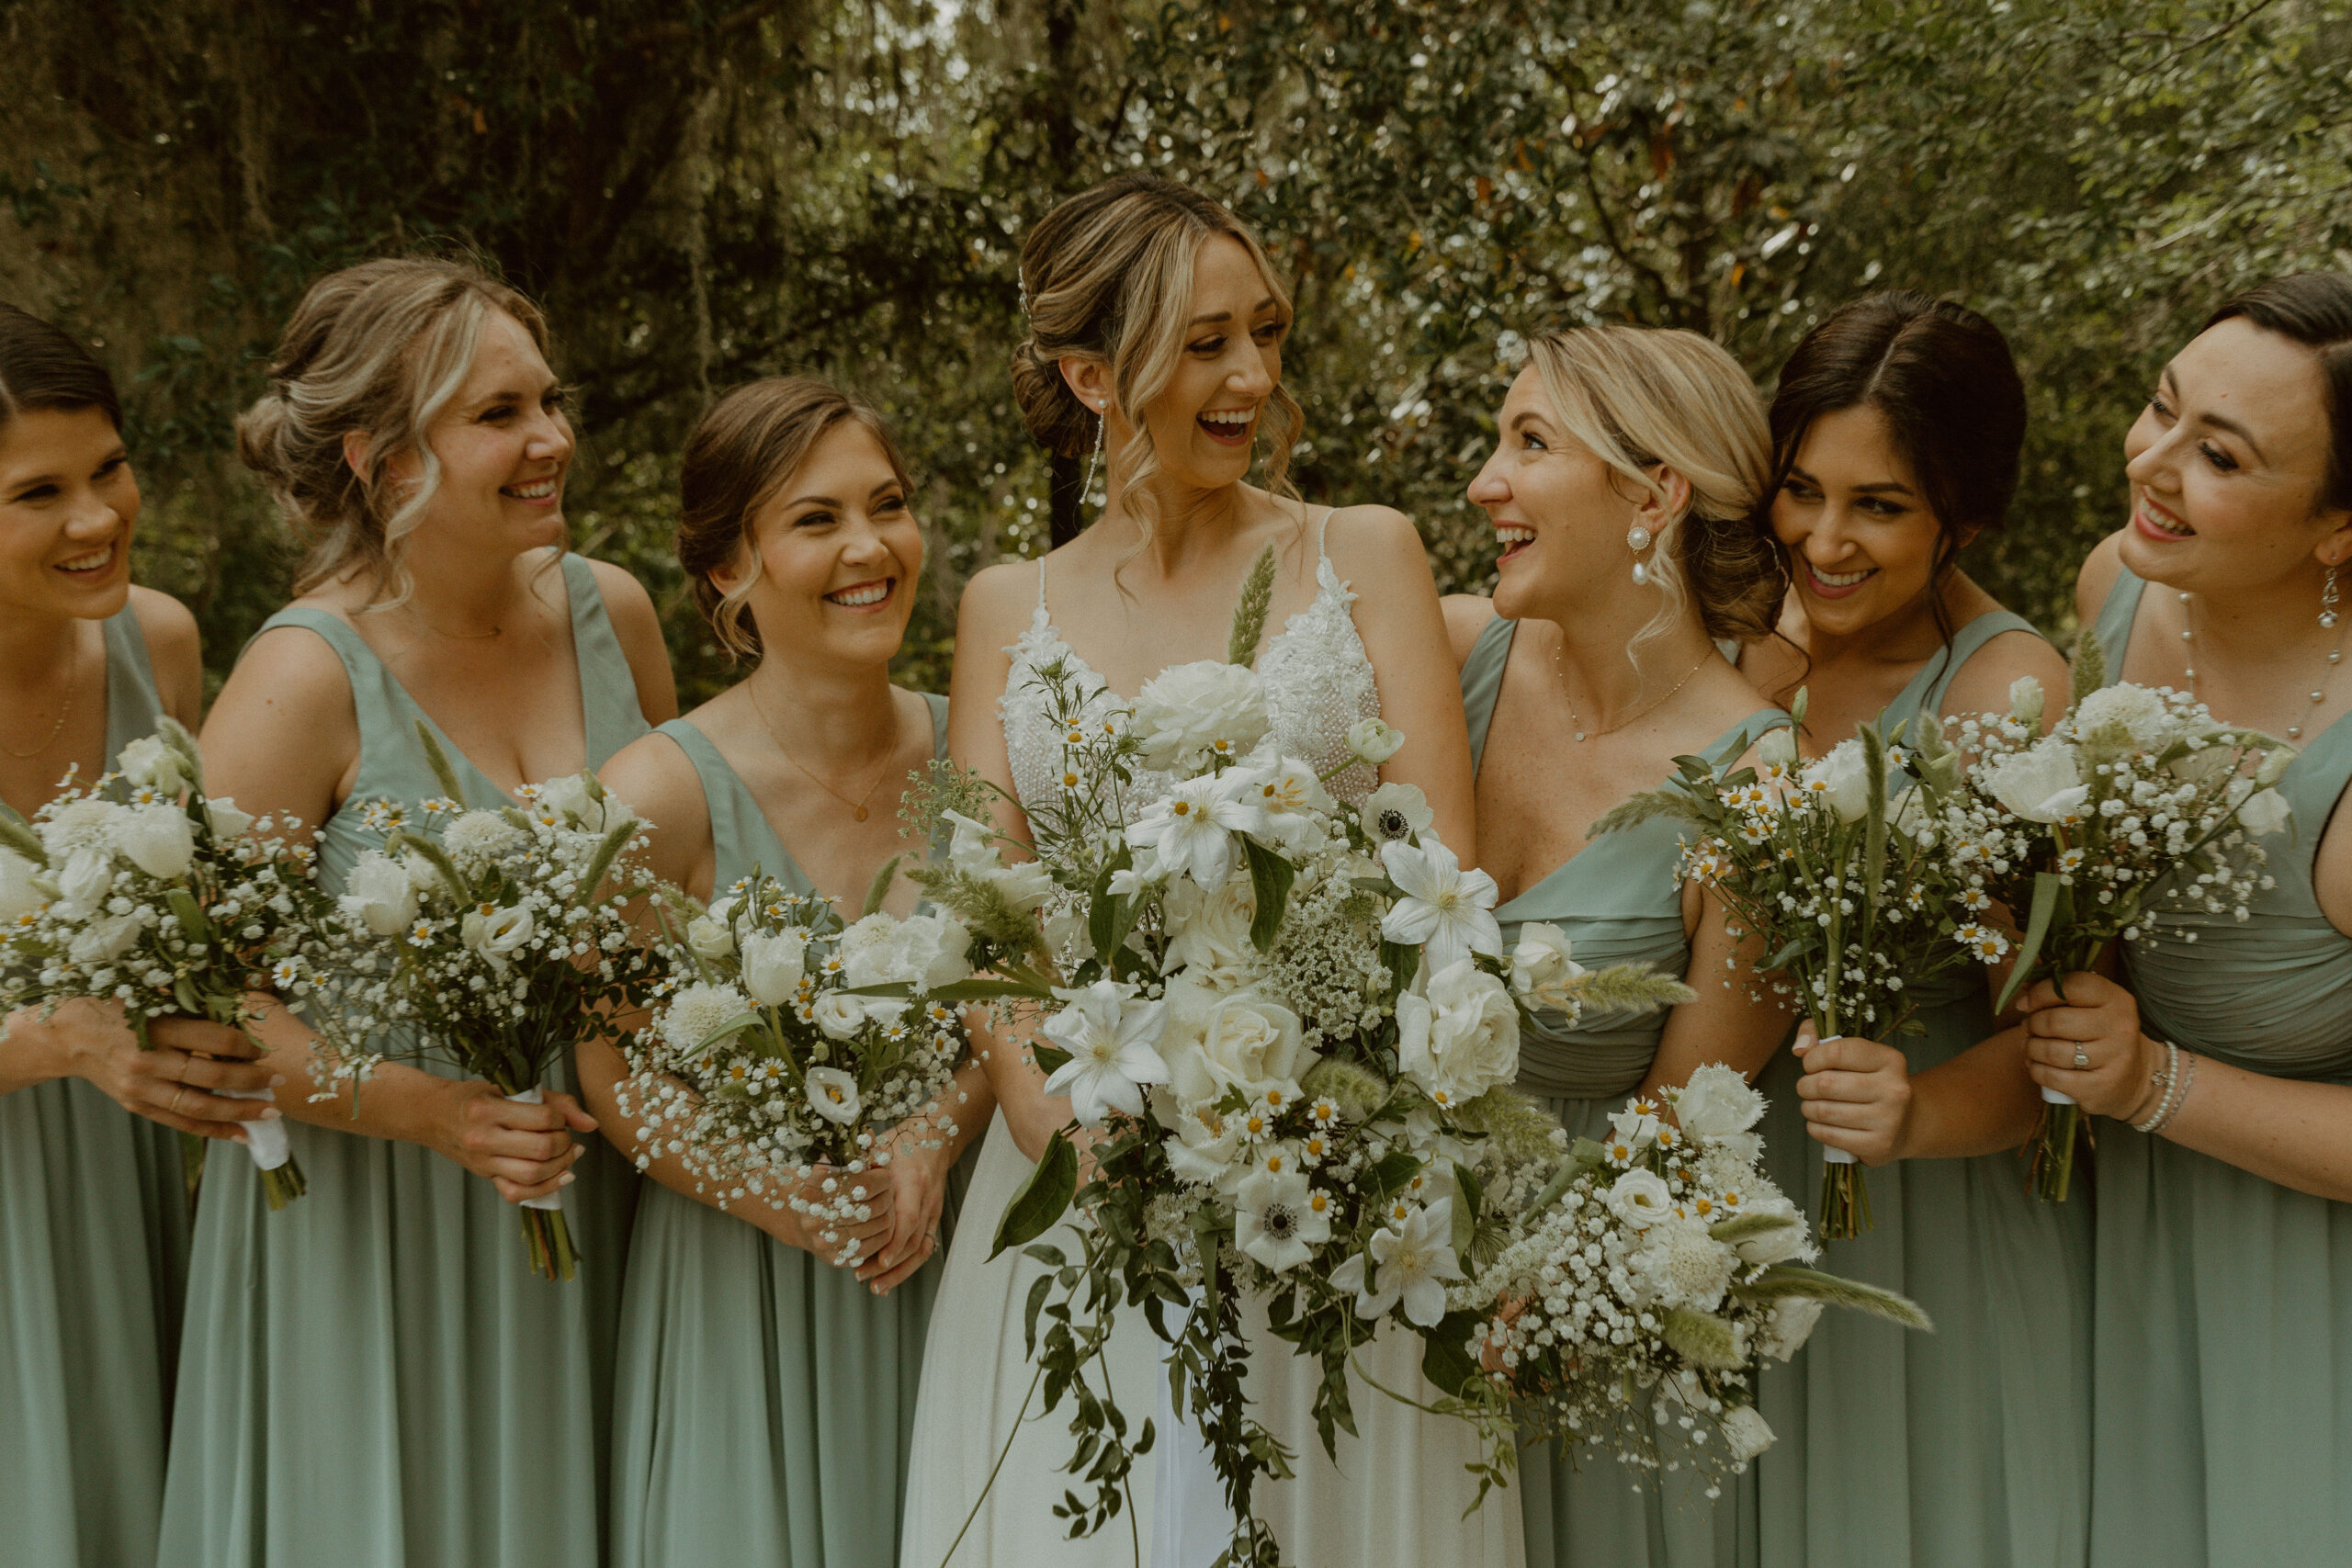 Radiant moment: Bride shares a photo, laughing with six bridesmaids, each in elegant green dresses and holding white flowers.